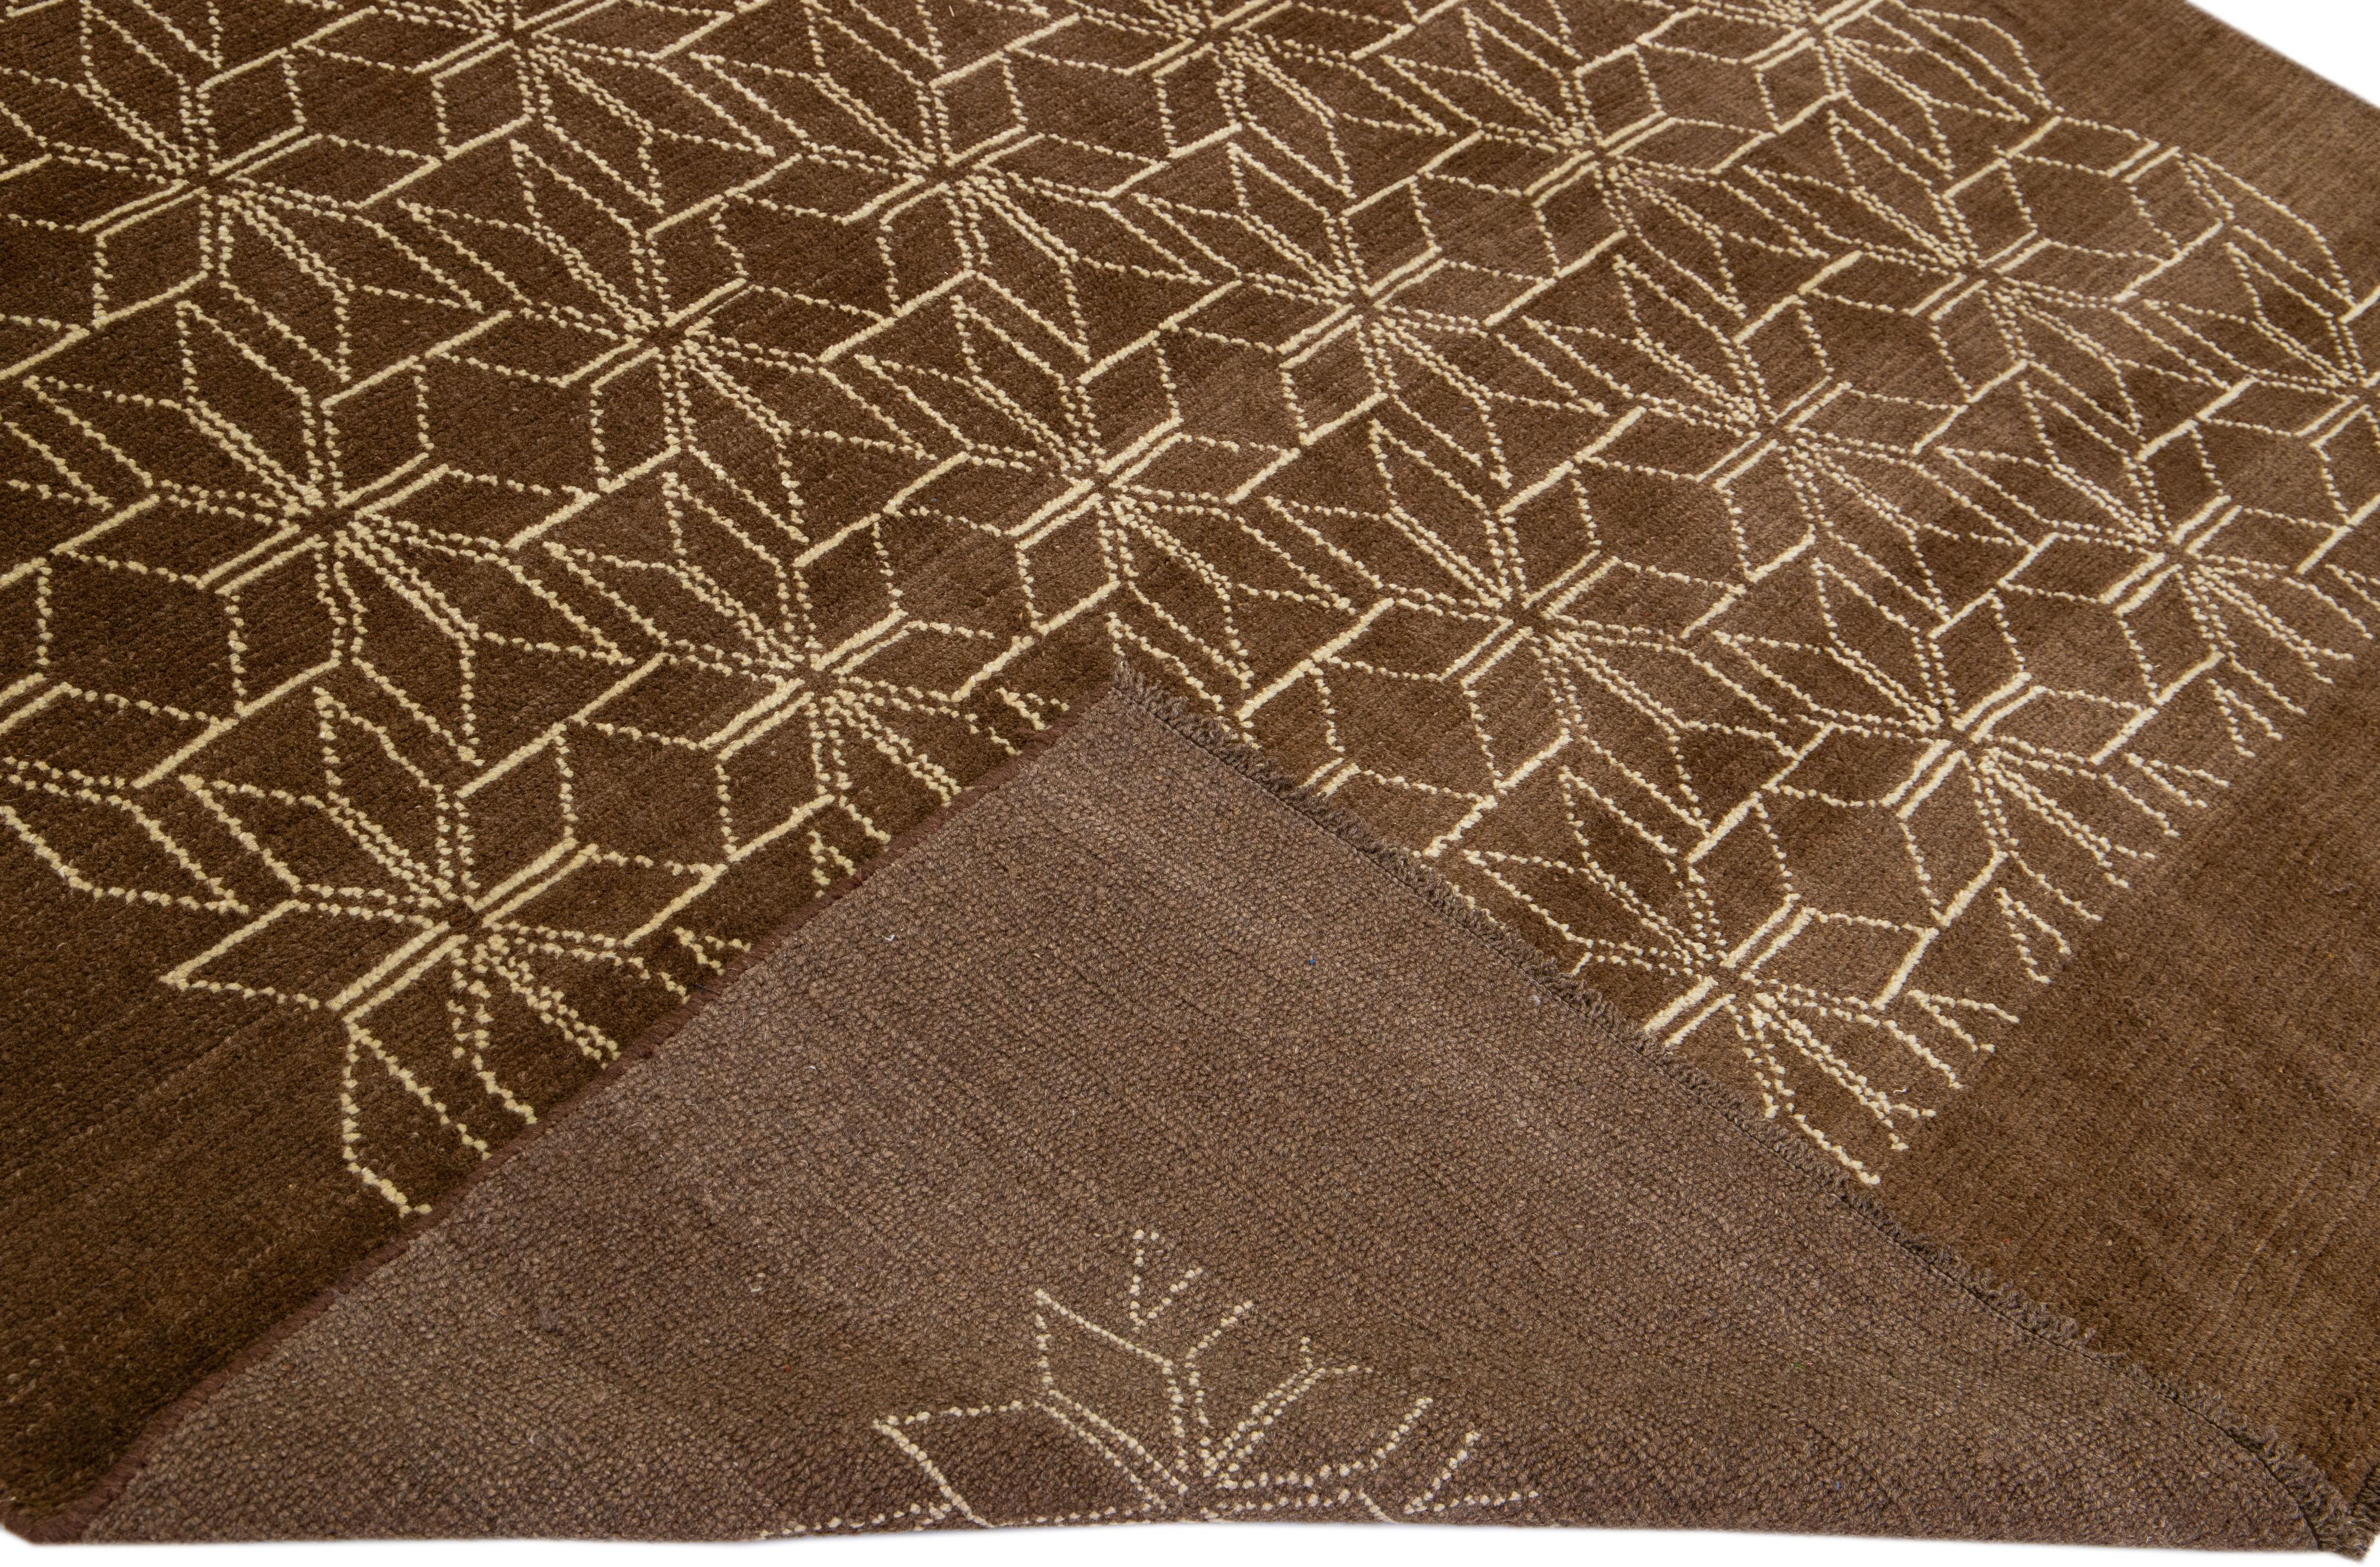 This Beautiful Moroccan-style handmade wool rug makes part of our Northwest collection and features a brown color field and beige accents in a gorgeous geometric tribal design.

This rug measures: 7'2